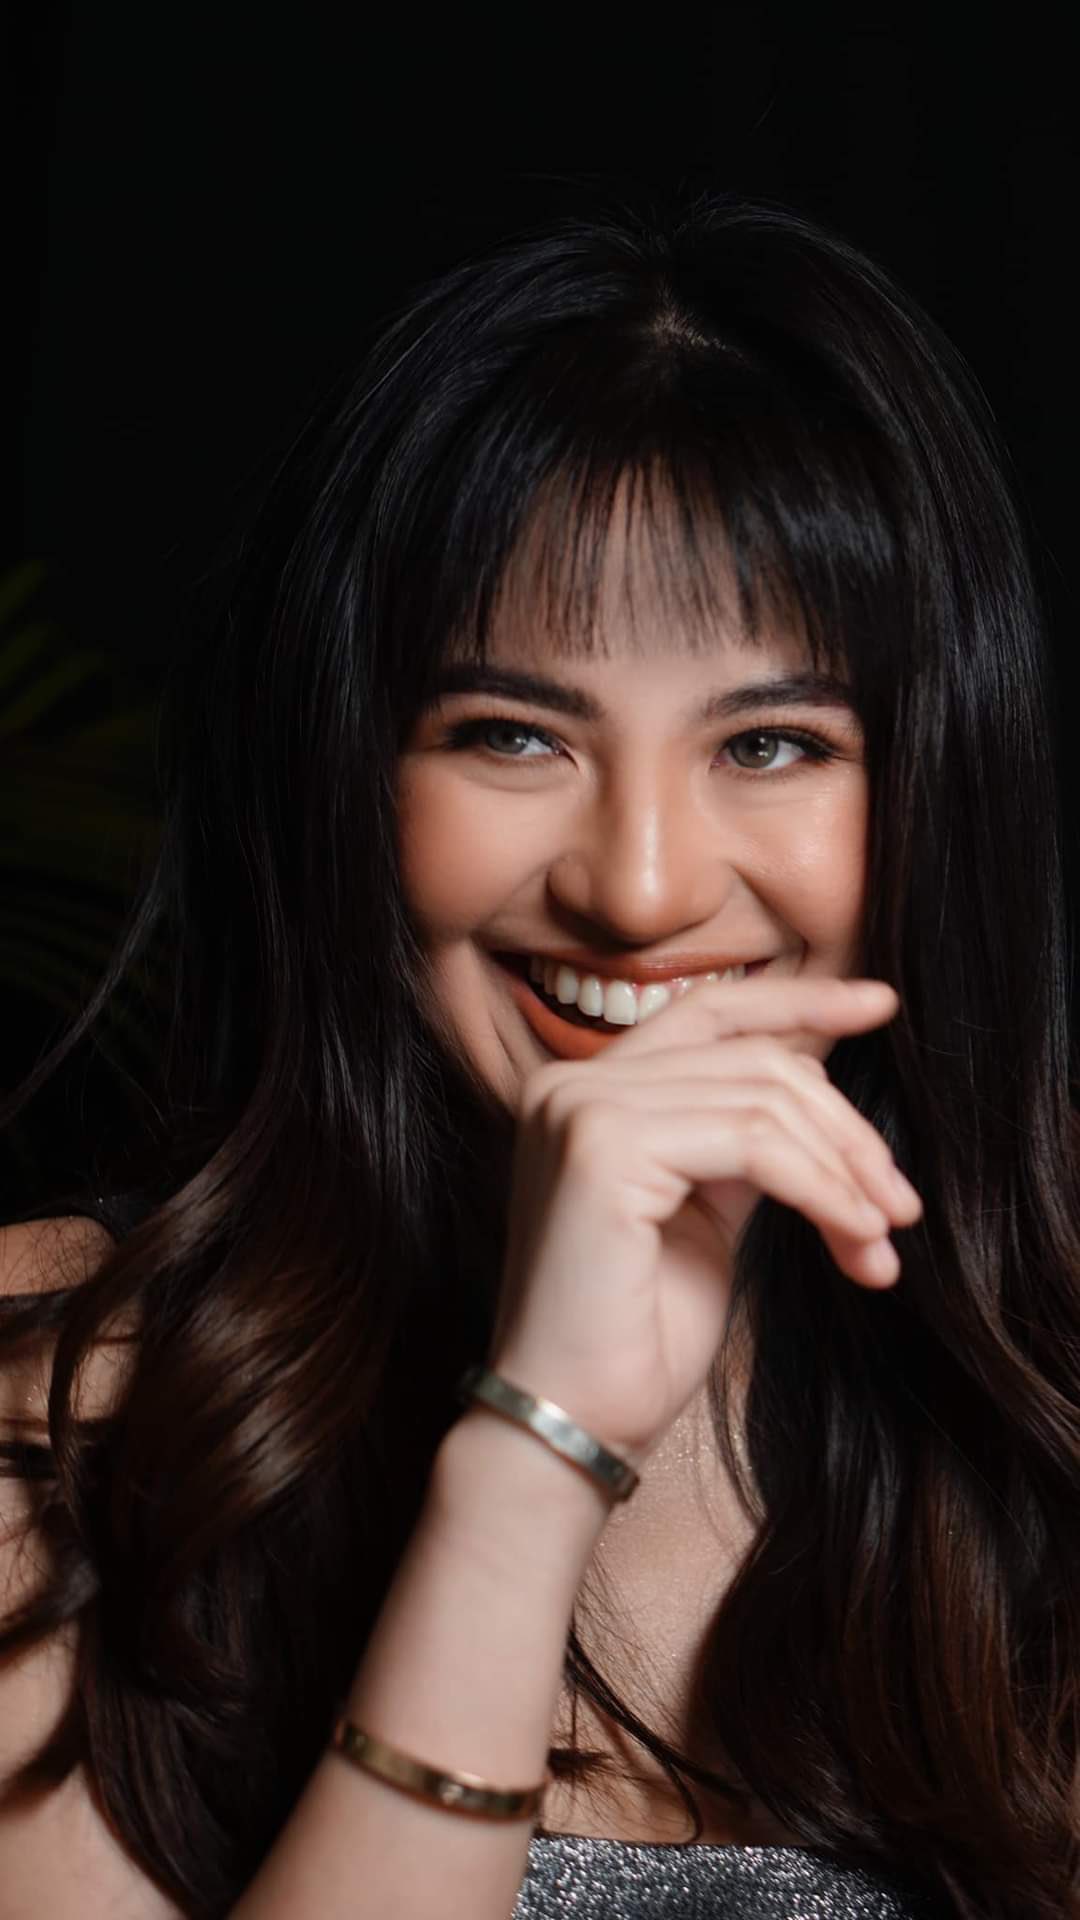 MAHAL NA MAHAL KITA JULIE ANNE SAN JOSE! HAPPY BIRTHDAY, QUEEN!

TODAY IS JULIE DAY  